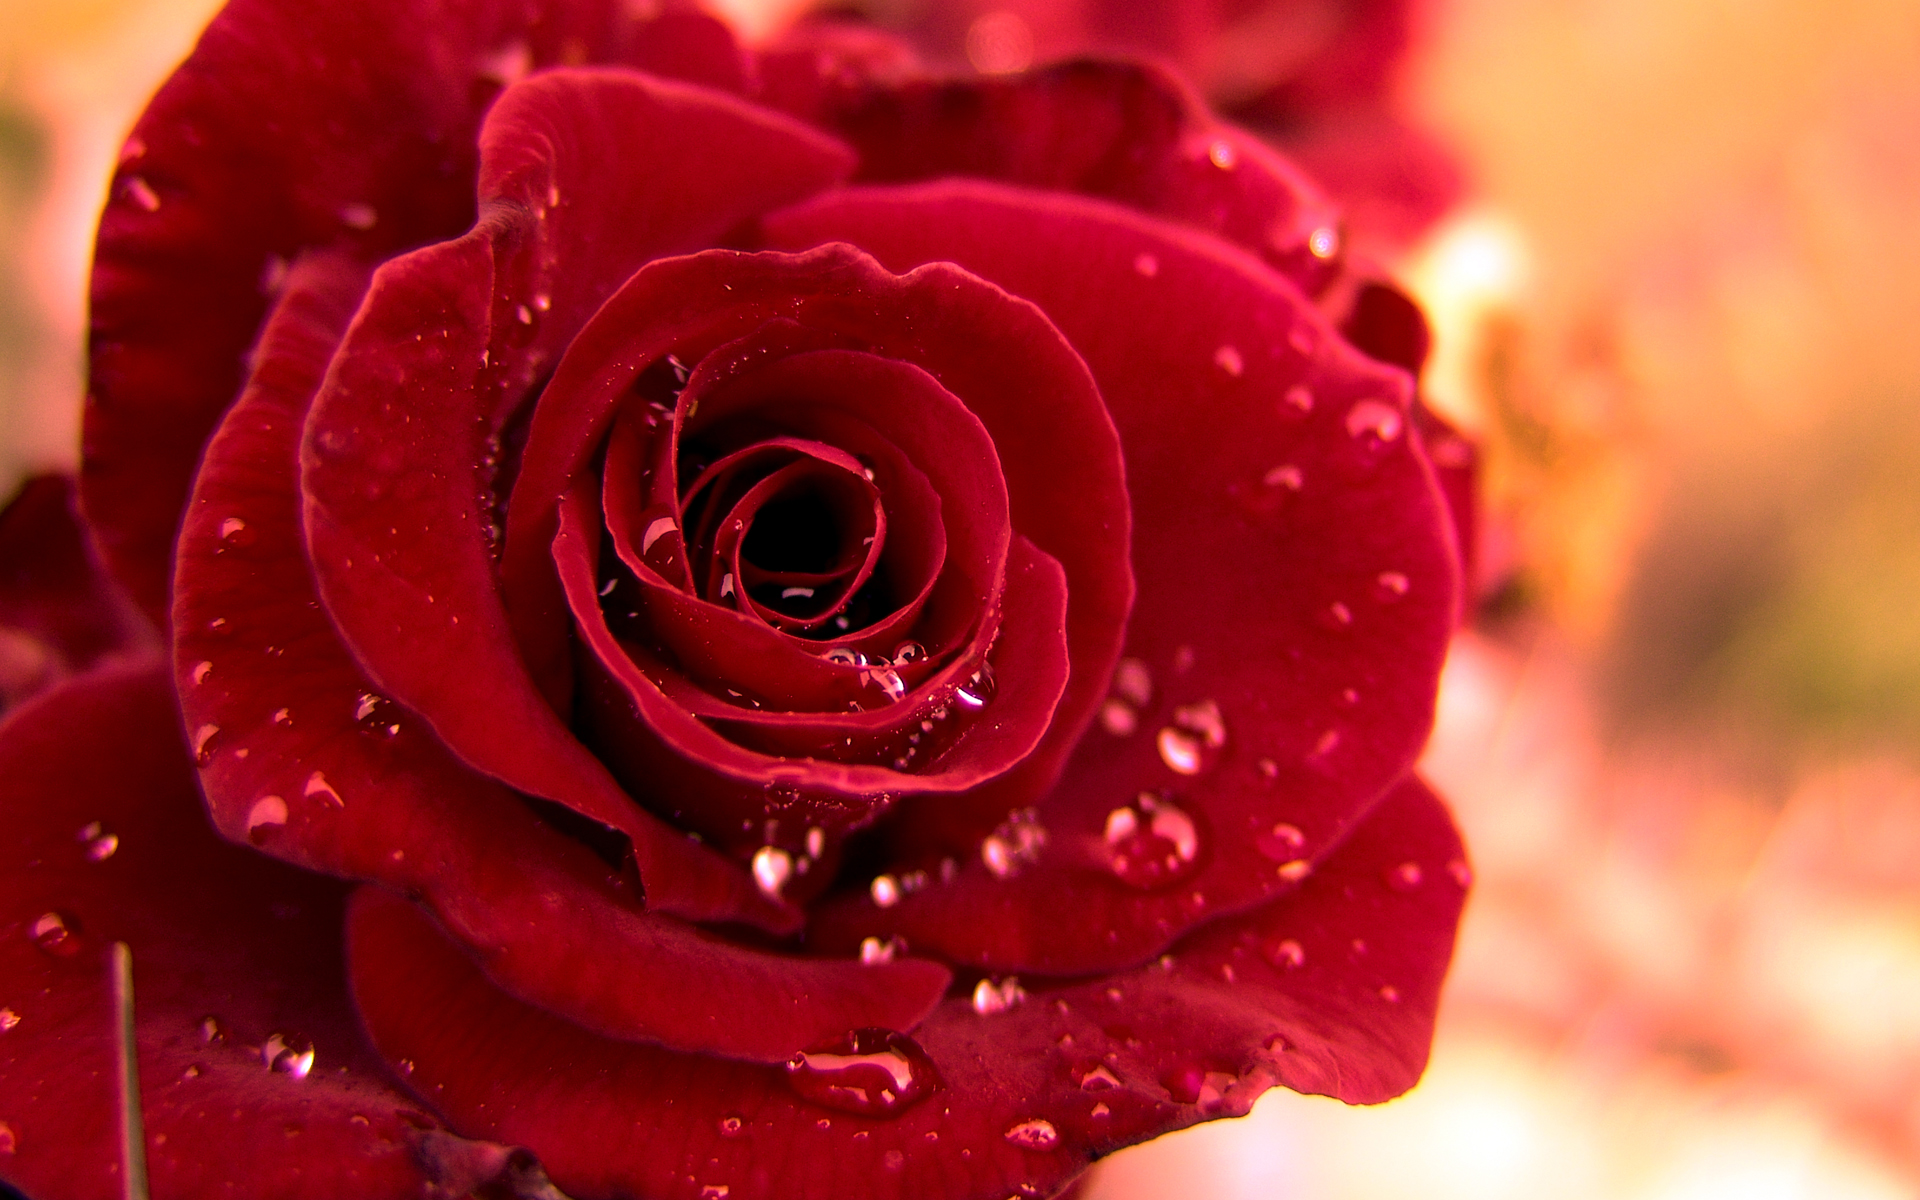 hd red rose wallpaper for rose day 1920x1200